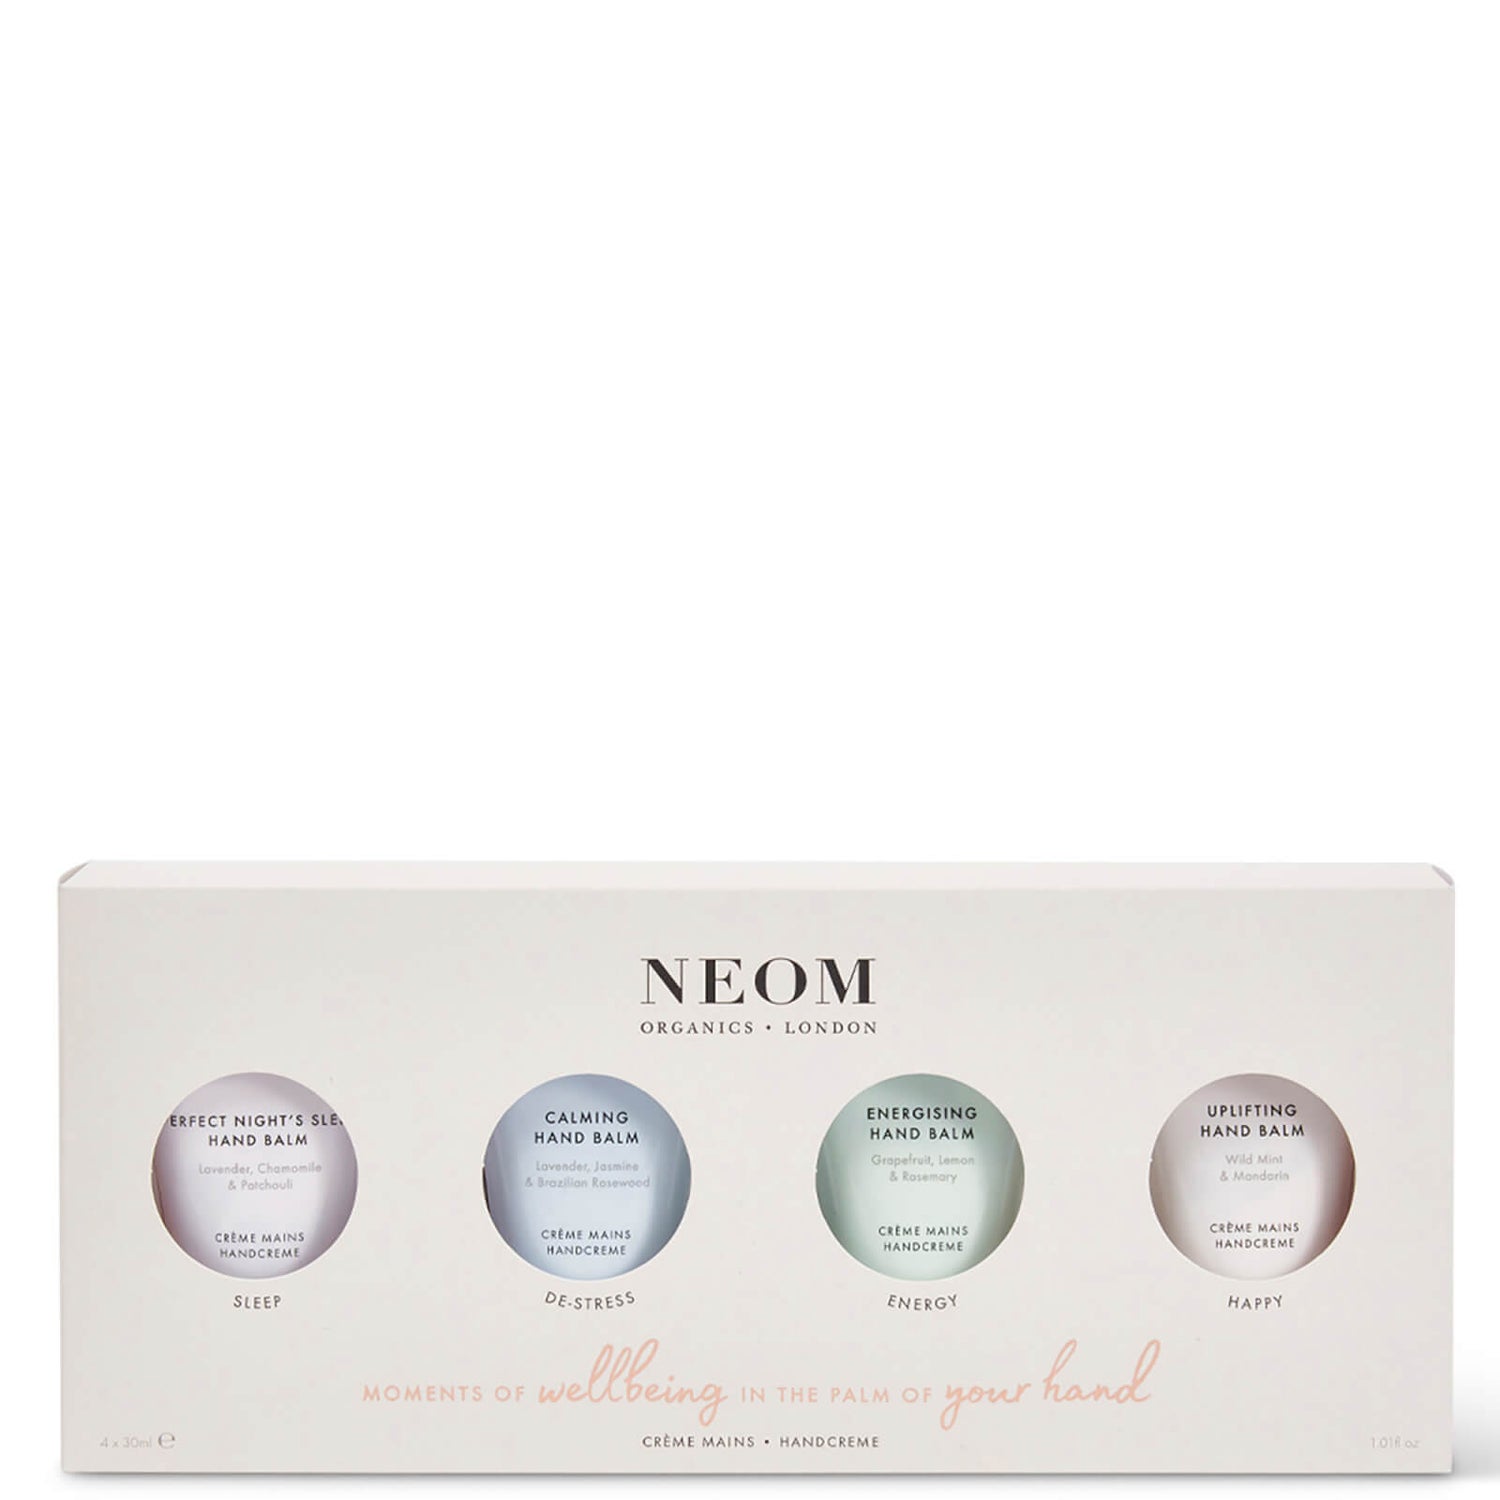 NEOM Moments of Wellbeing in the Palm of Your Hand 120ml (Worth $40.00)